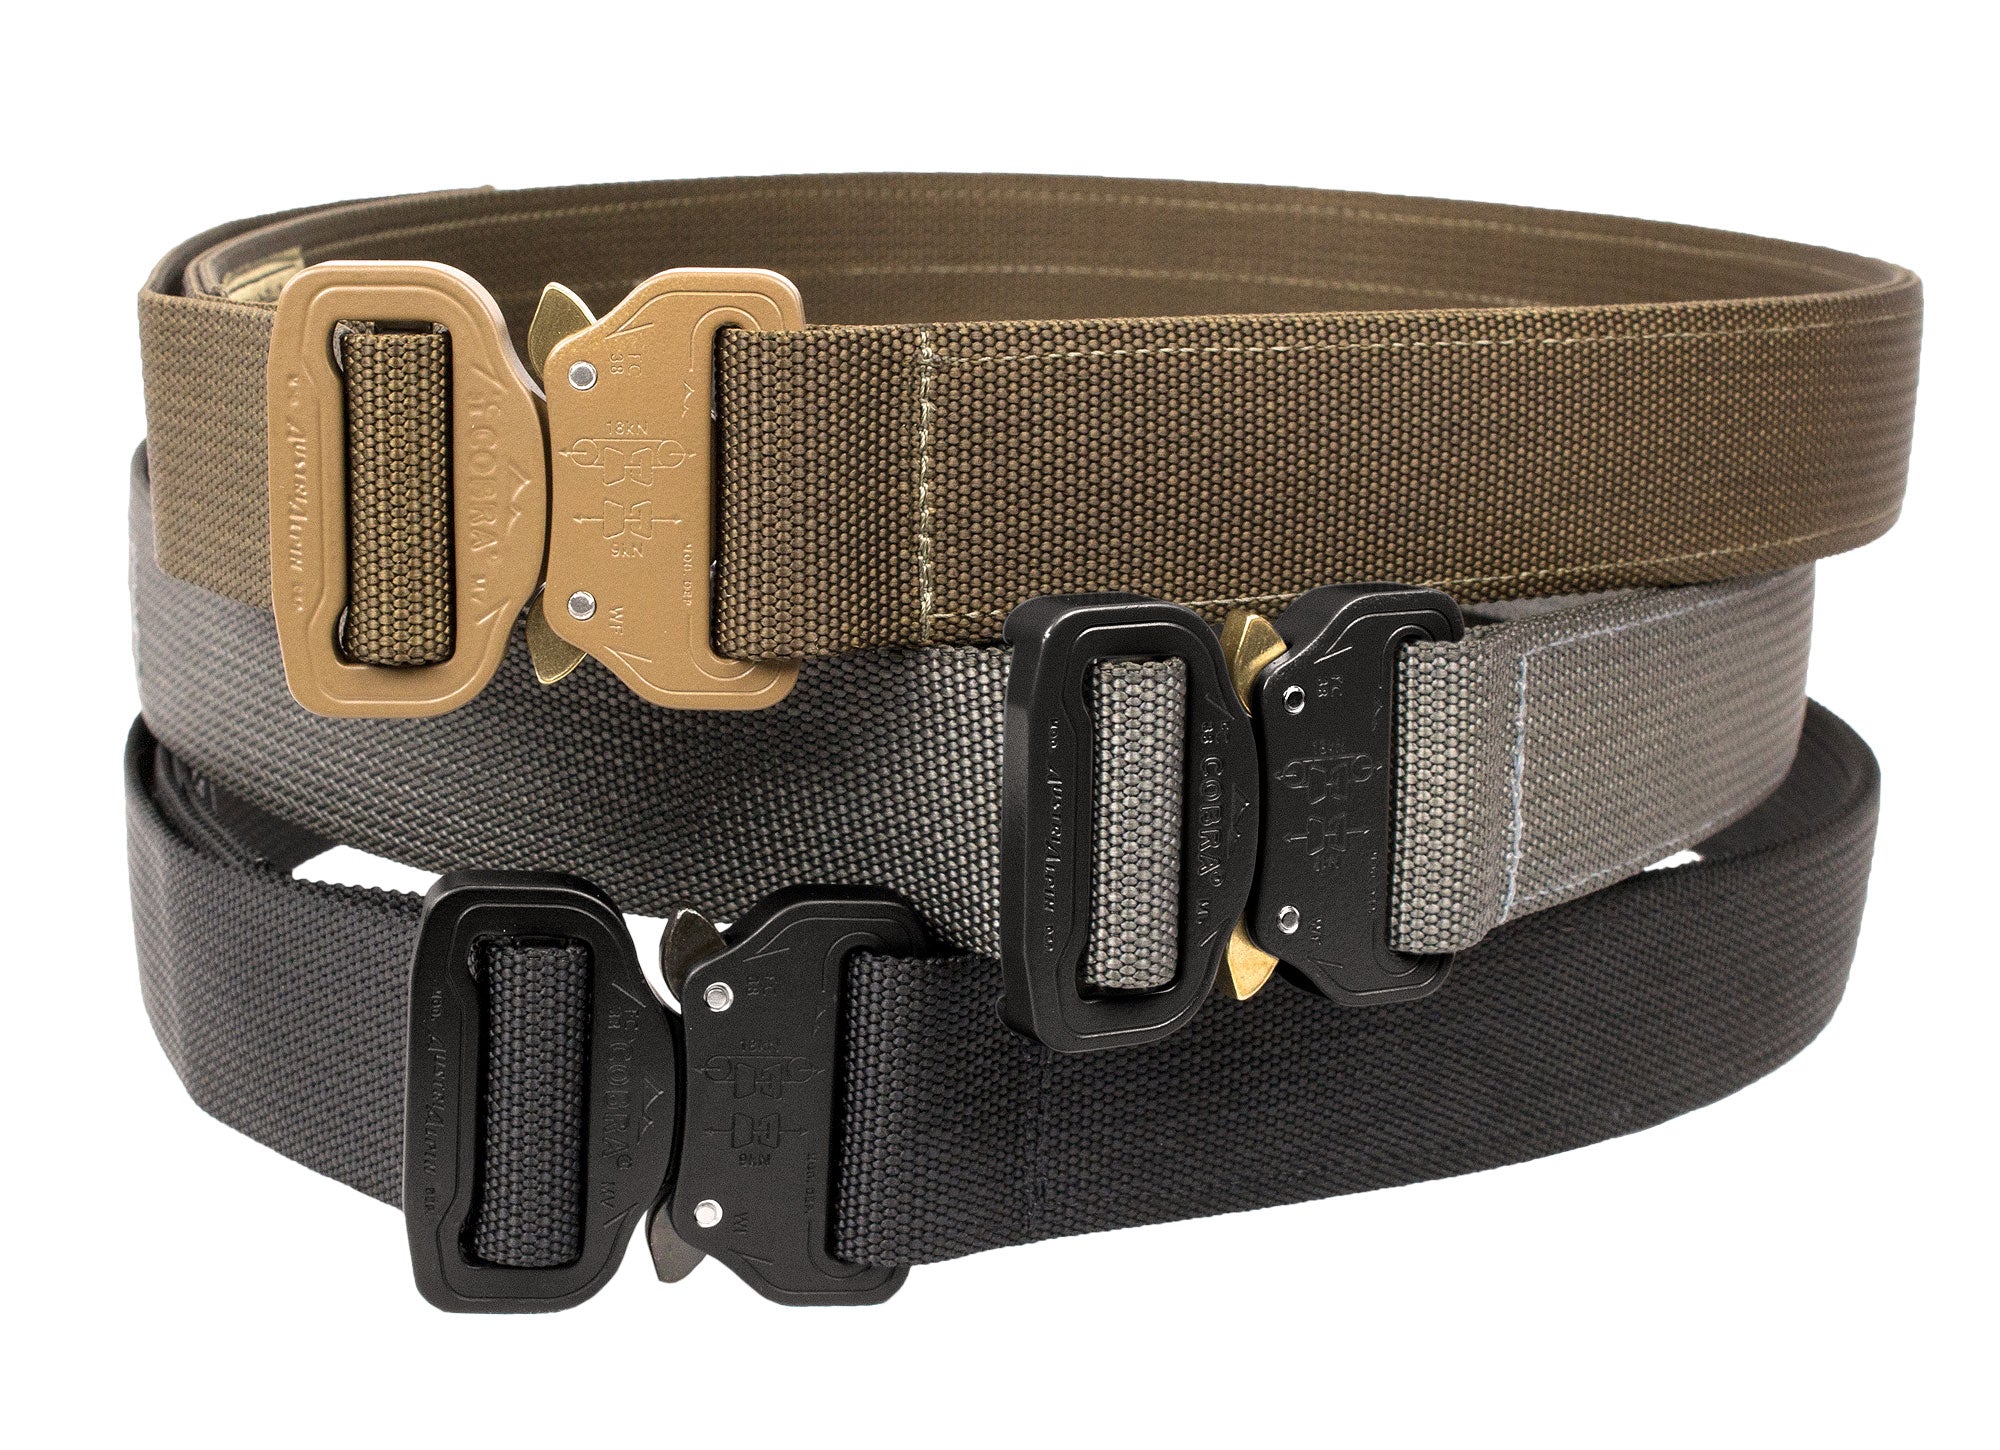 Cobra Shooter's Belt, three colors shown together